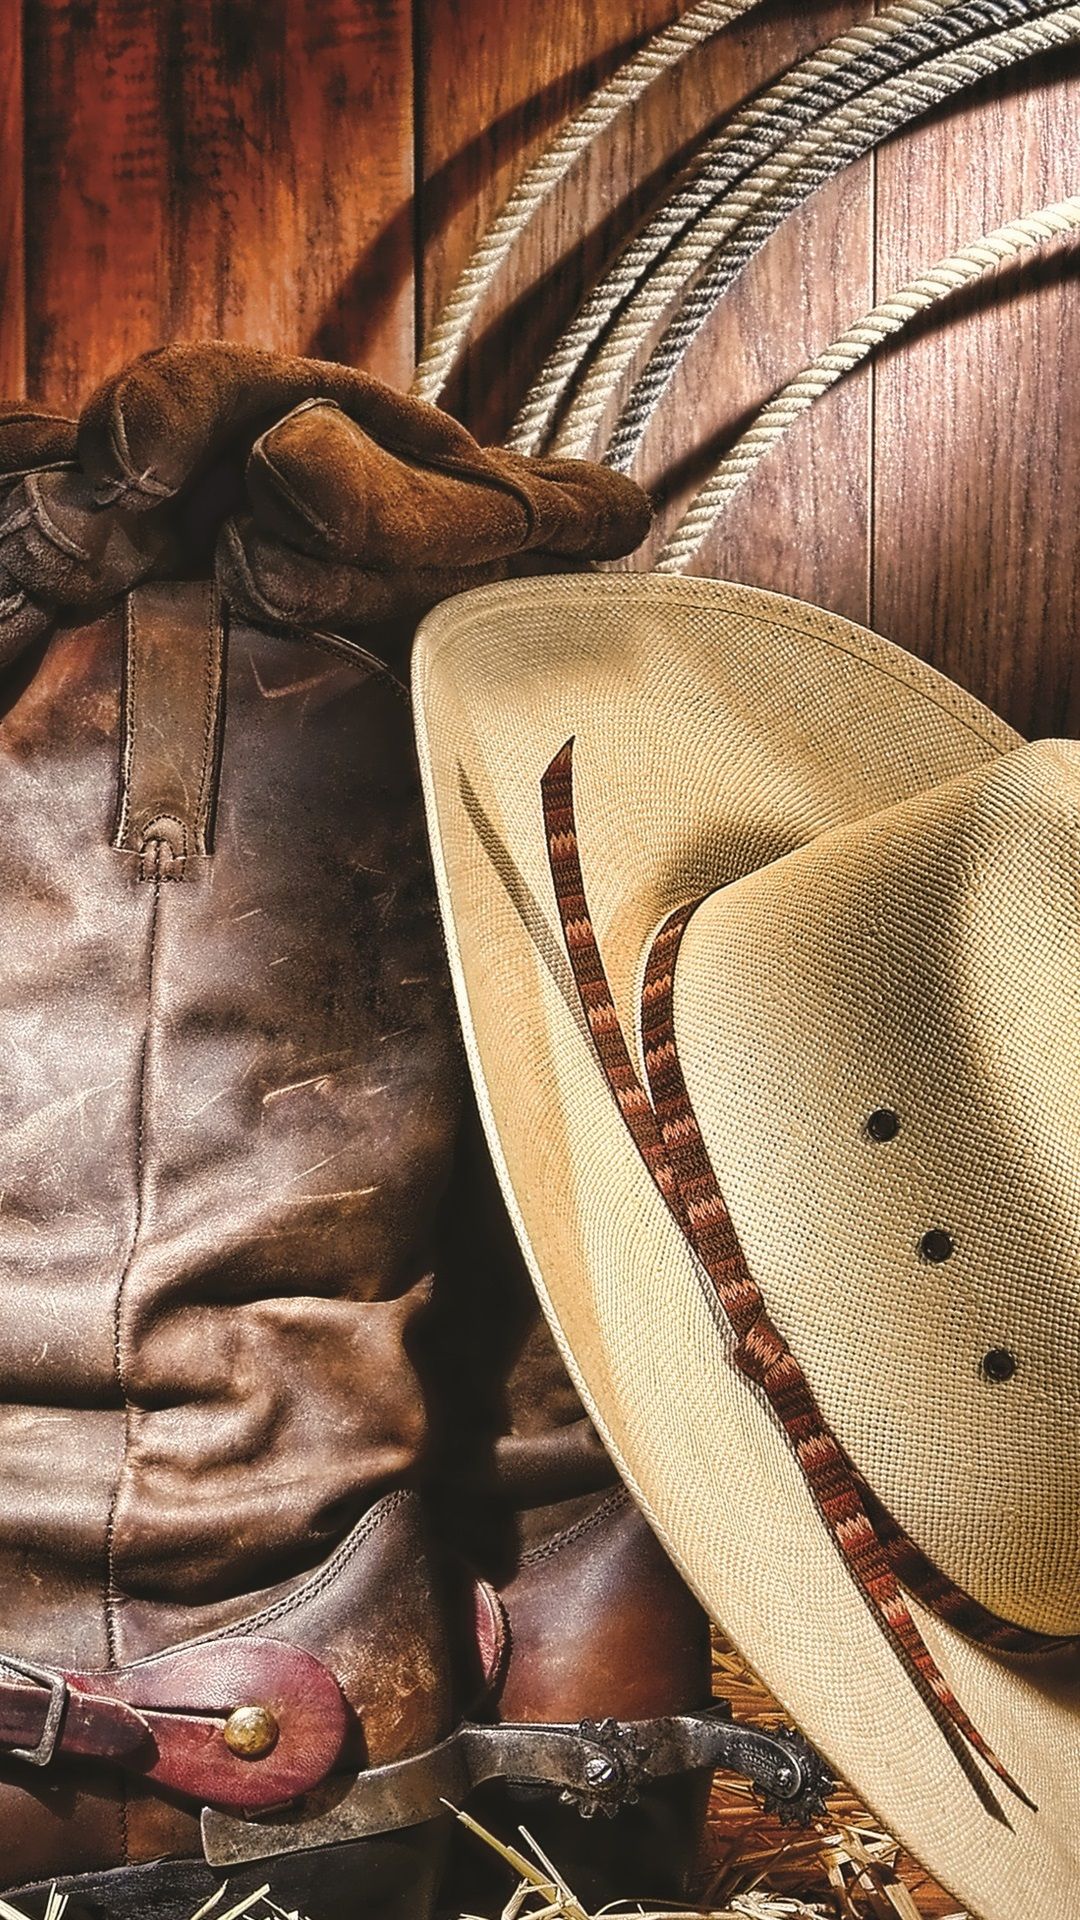 Cowboy Shoes And Hat 1080x1920 IPhone 8 7 6 6S Plus Wallpaper, Background, Picture, Image